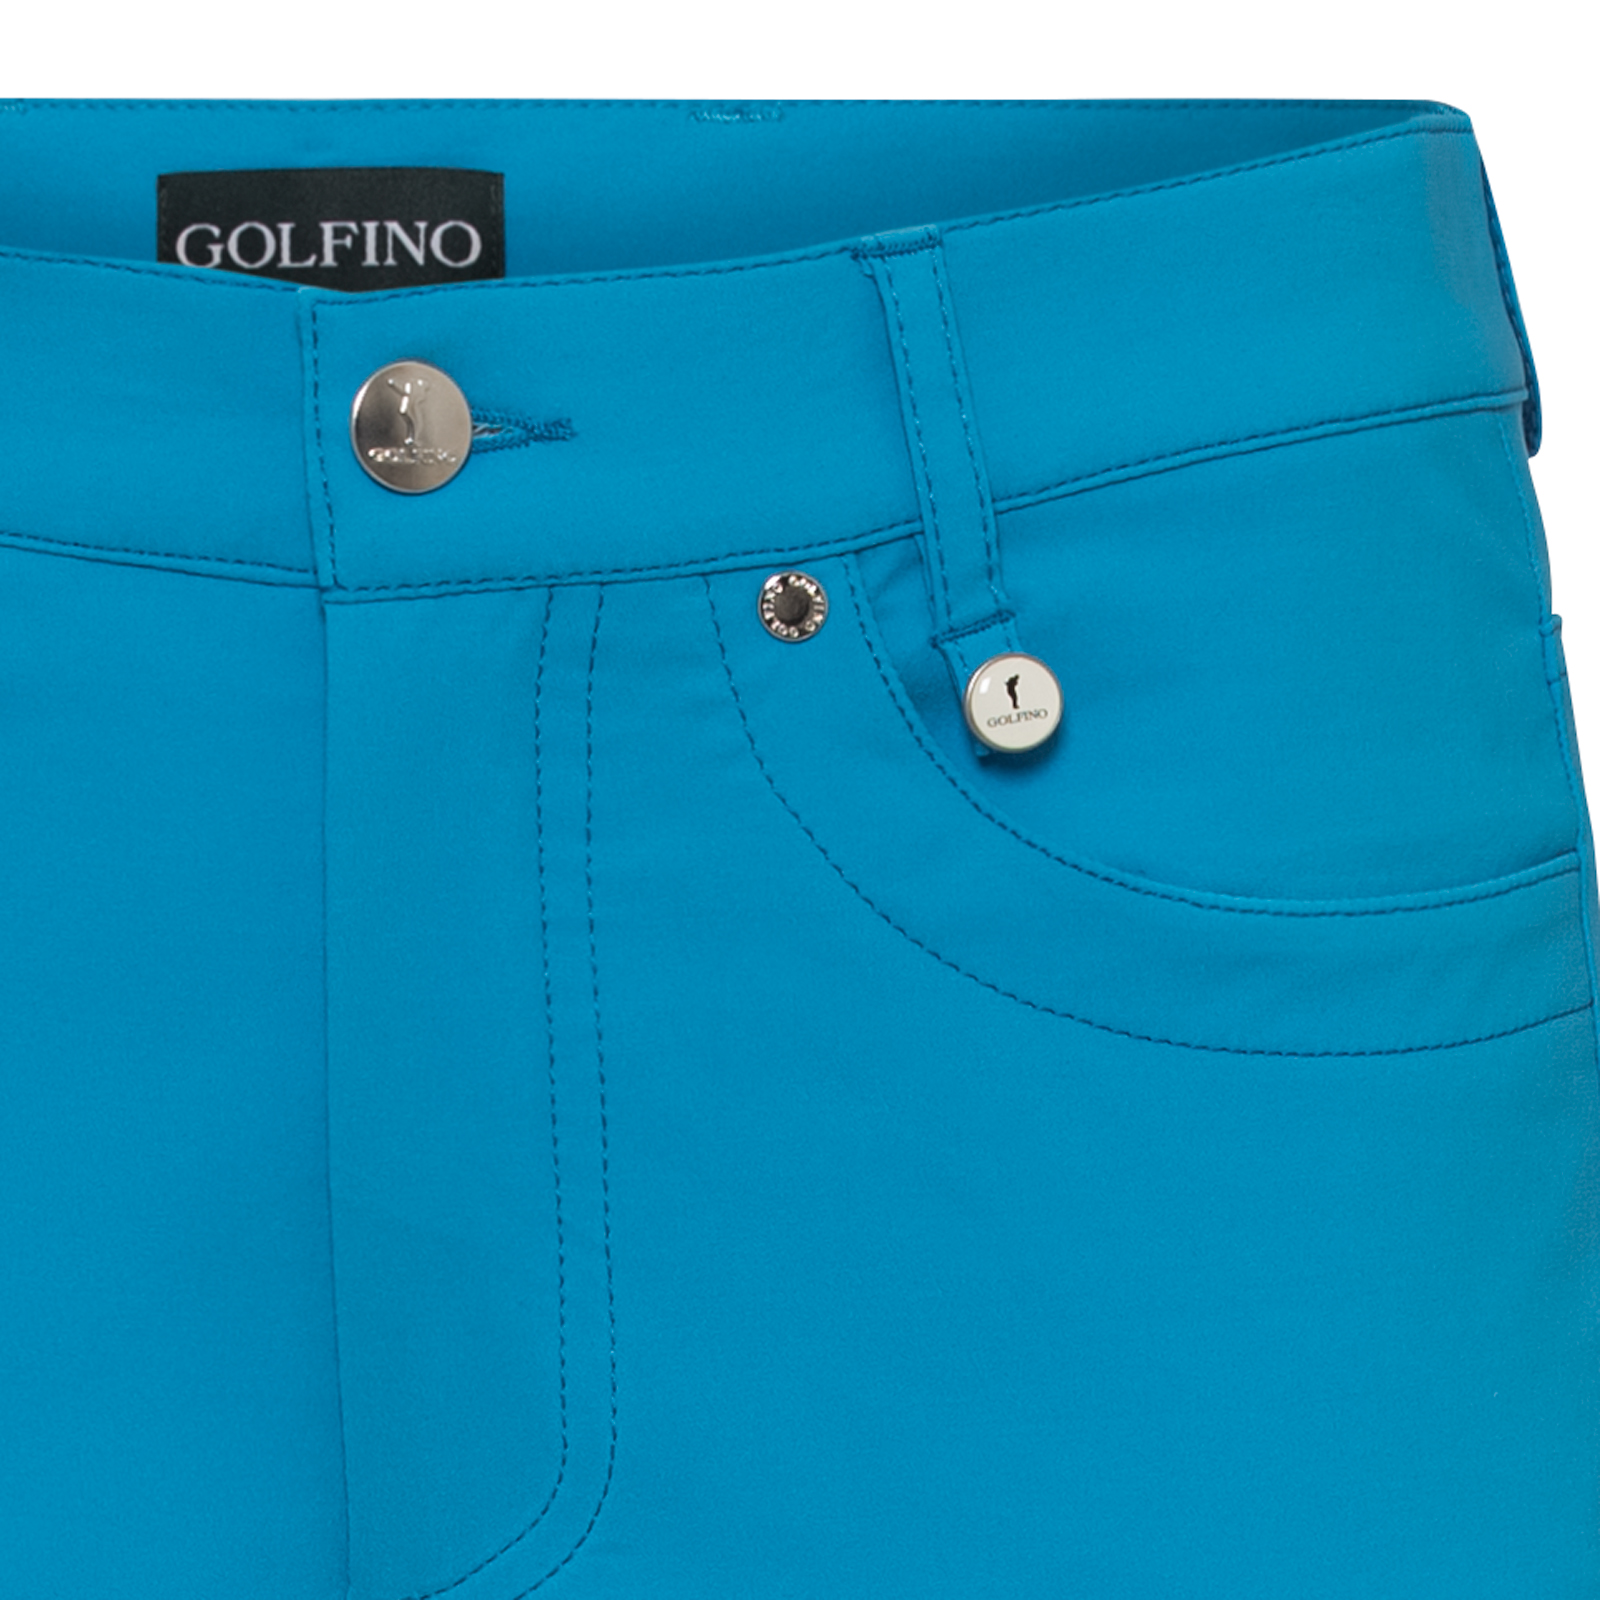 Ladies' 7/8 trousers in casual 5-pocket style